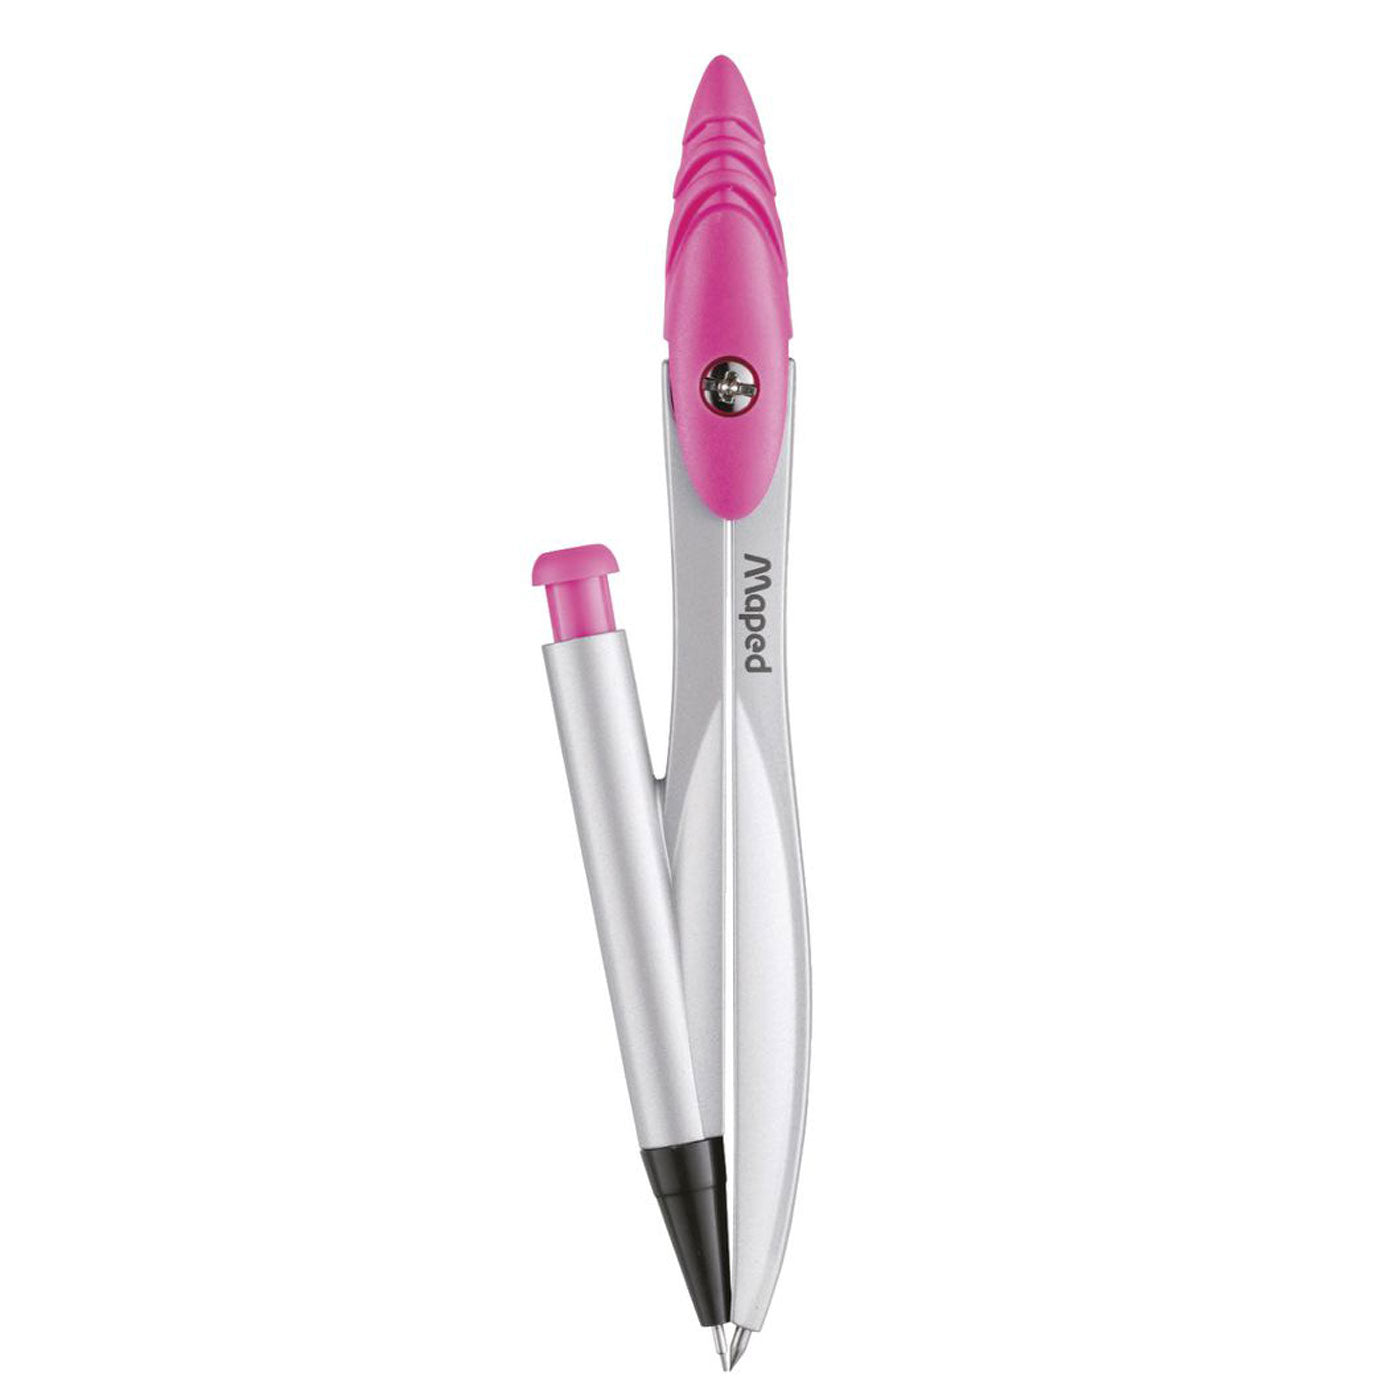 Maped-Study-Compass-Metal-with-0.5mm-Mechanical-Pencil-Pink